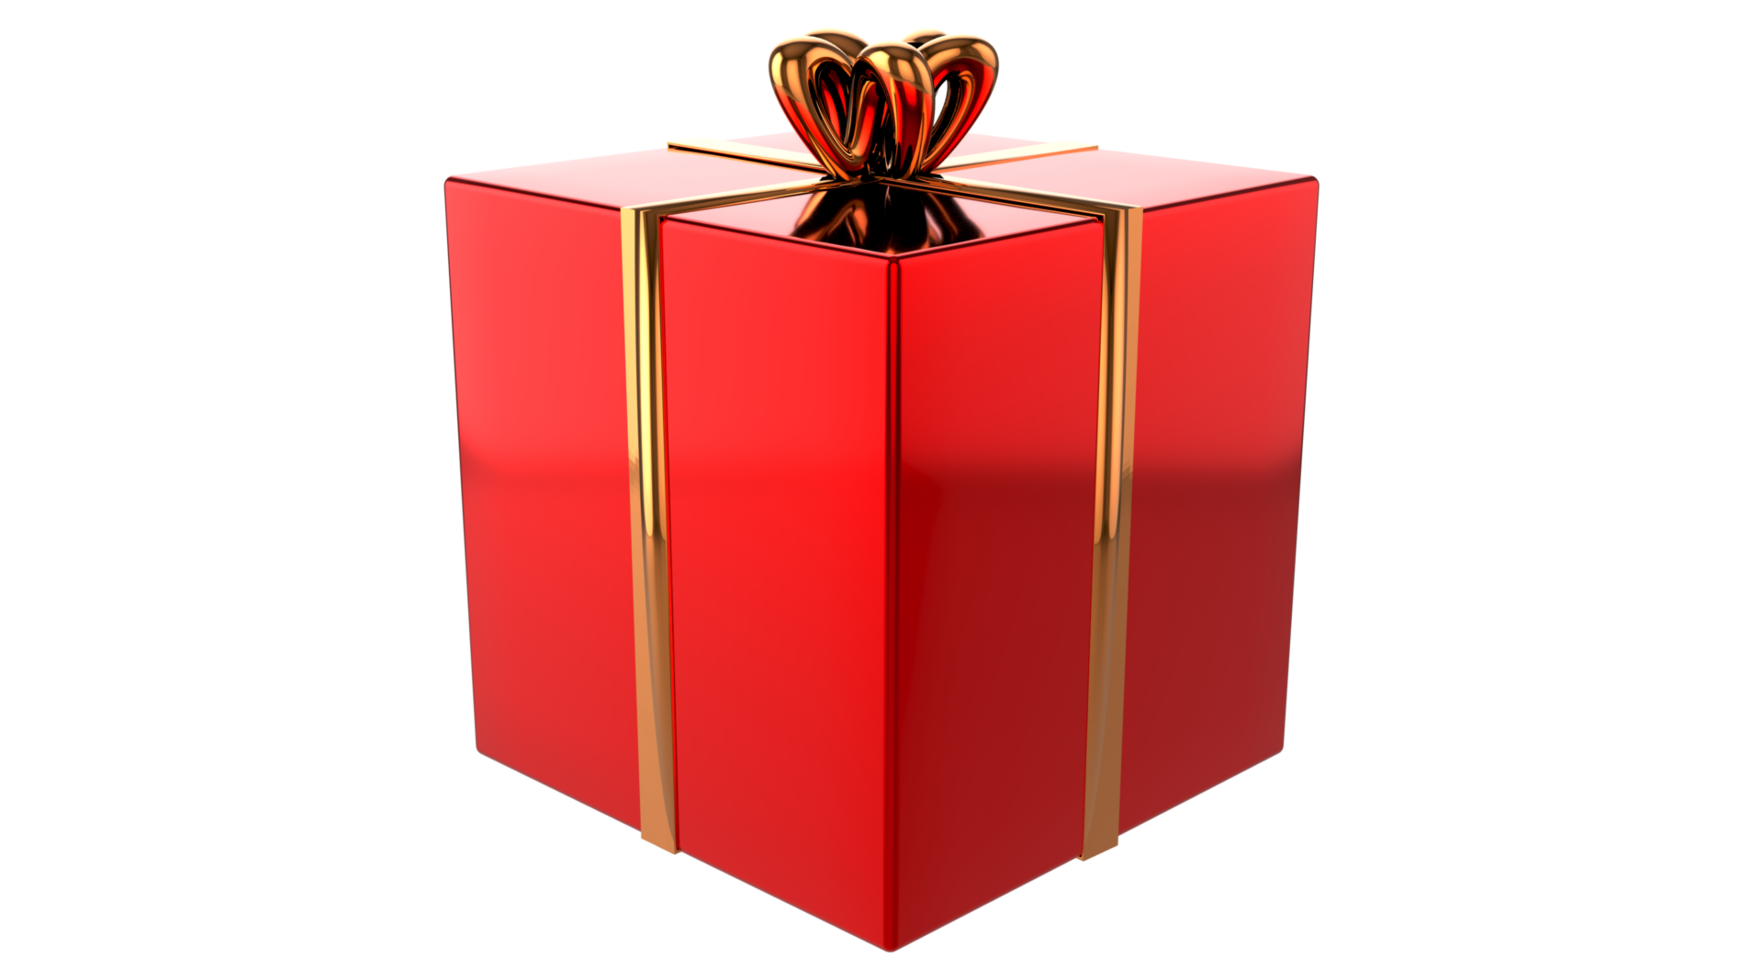 3d Realistic Gift Box with Gold Ribbon Gift Bow Transparent PNG. Decoration 3D illustration png